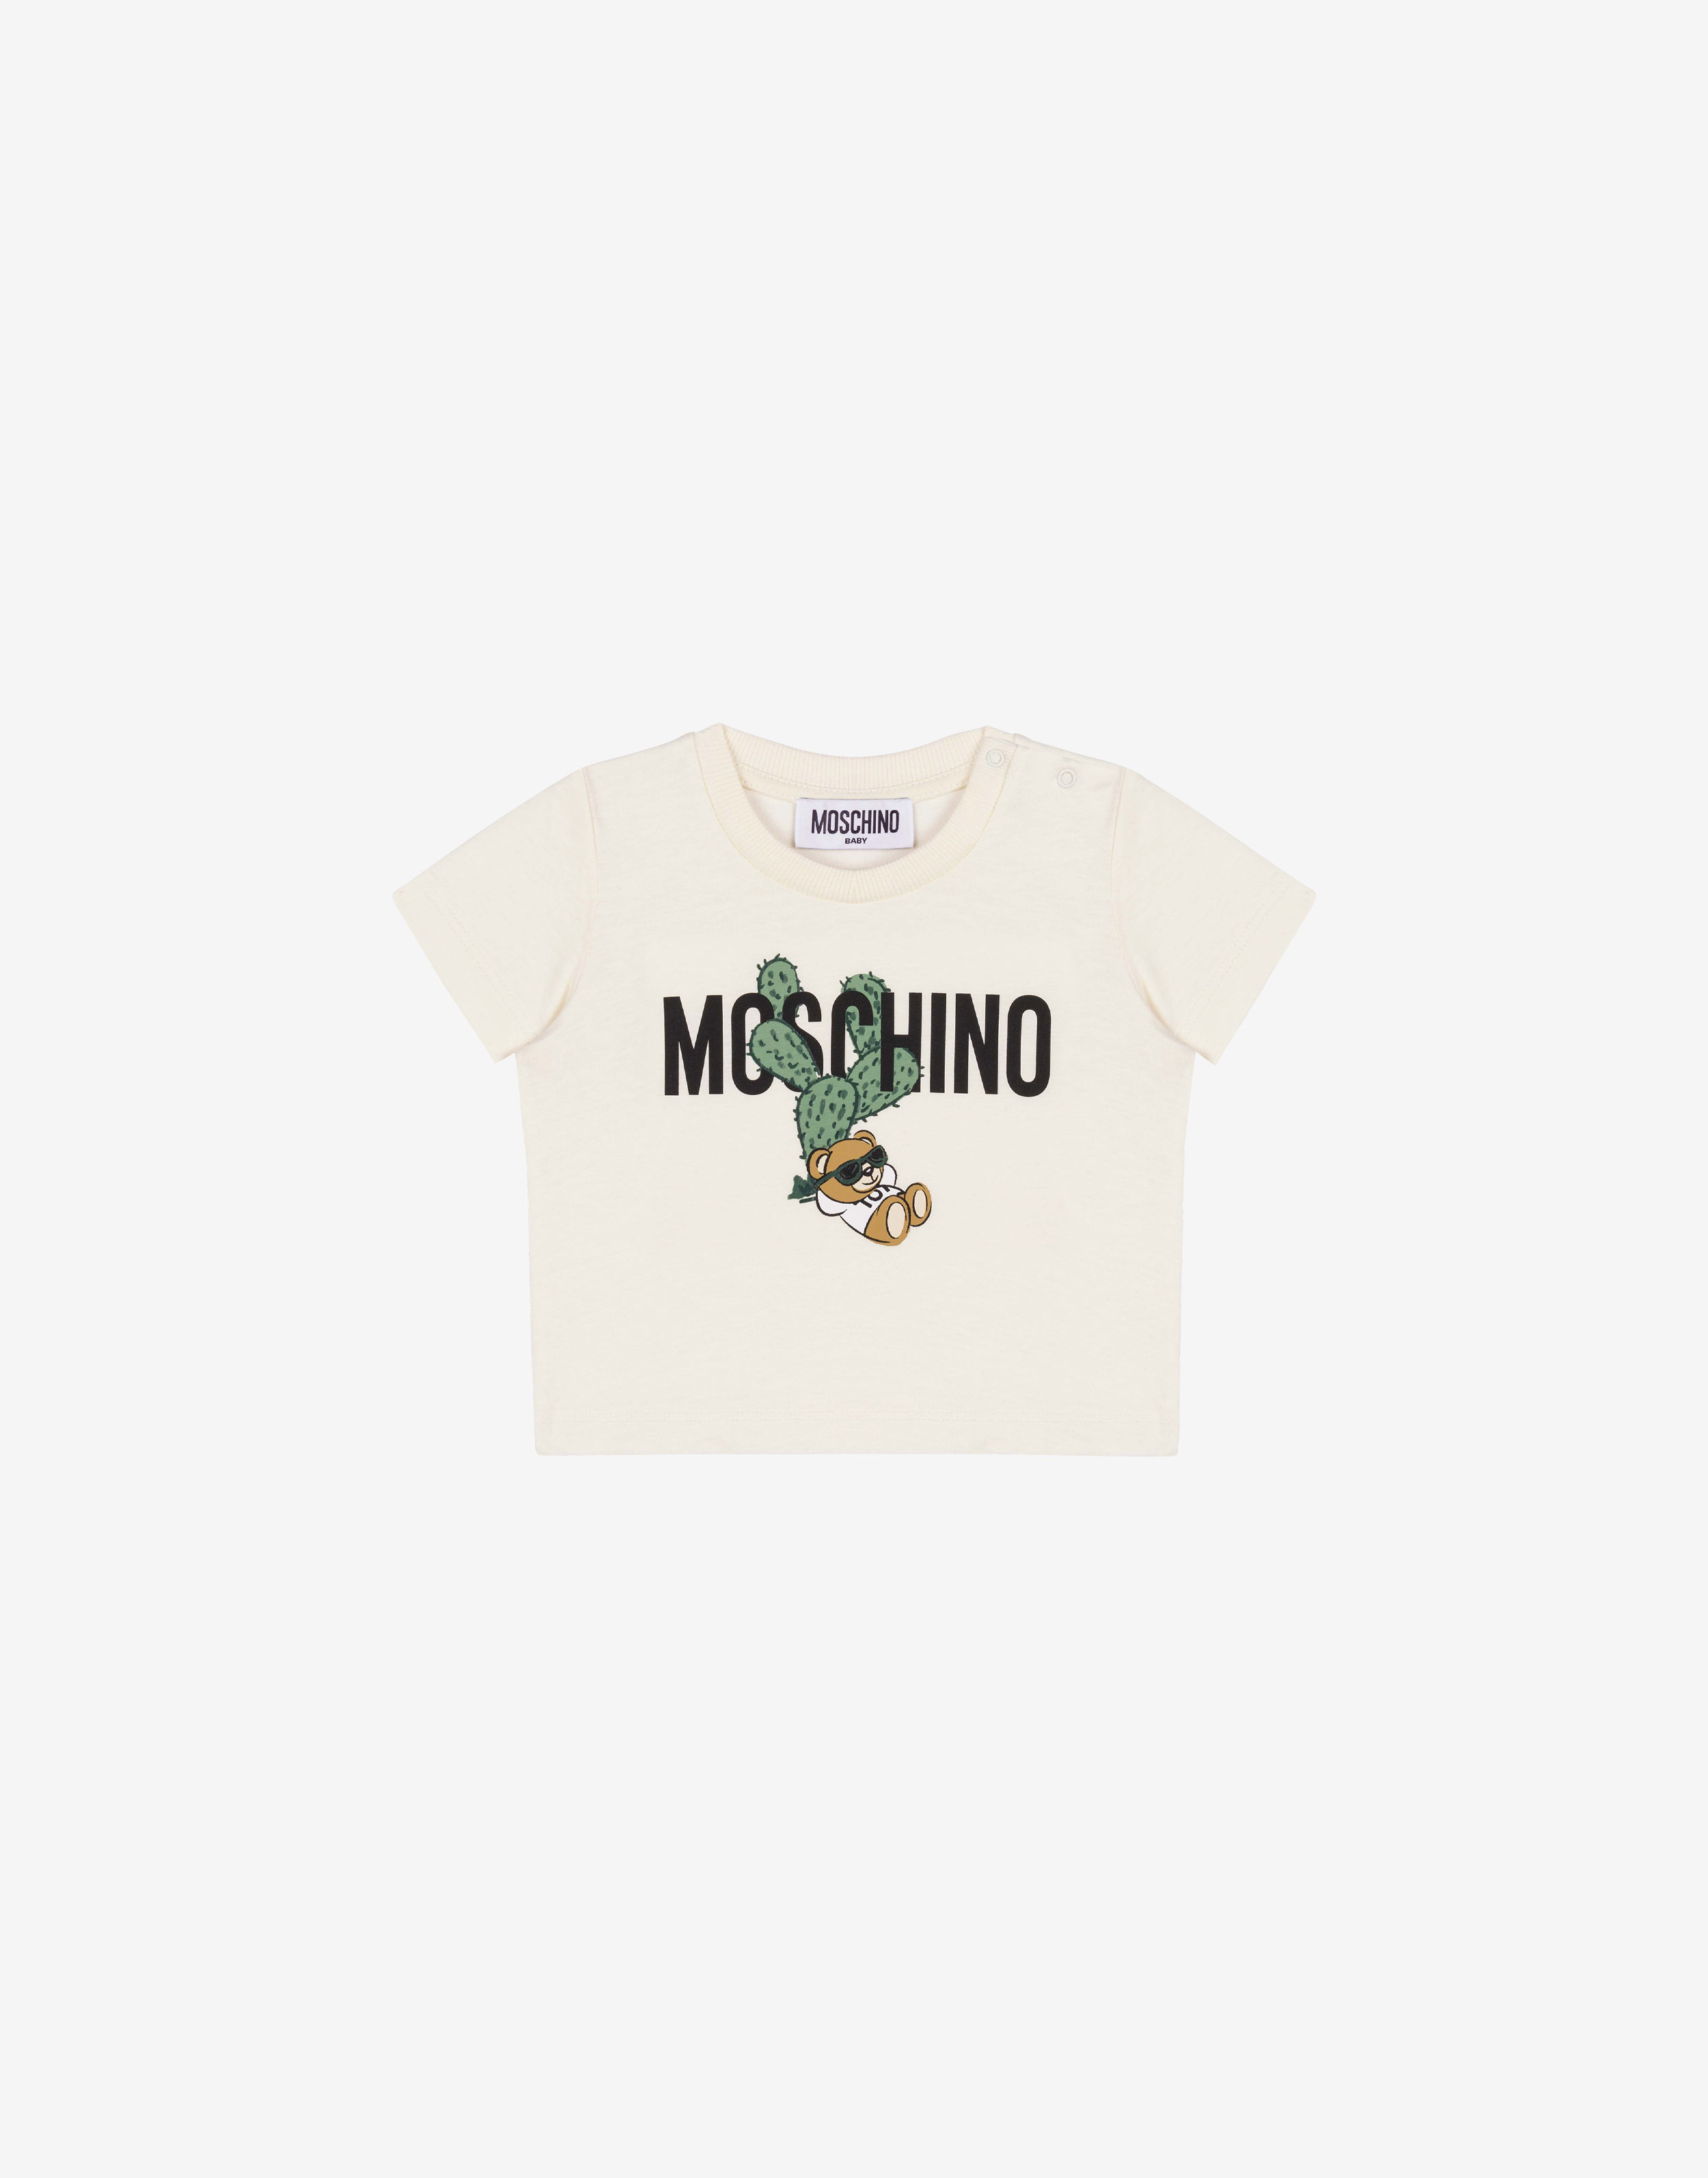 Moschino Shirts for Men - Official Store